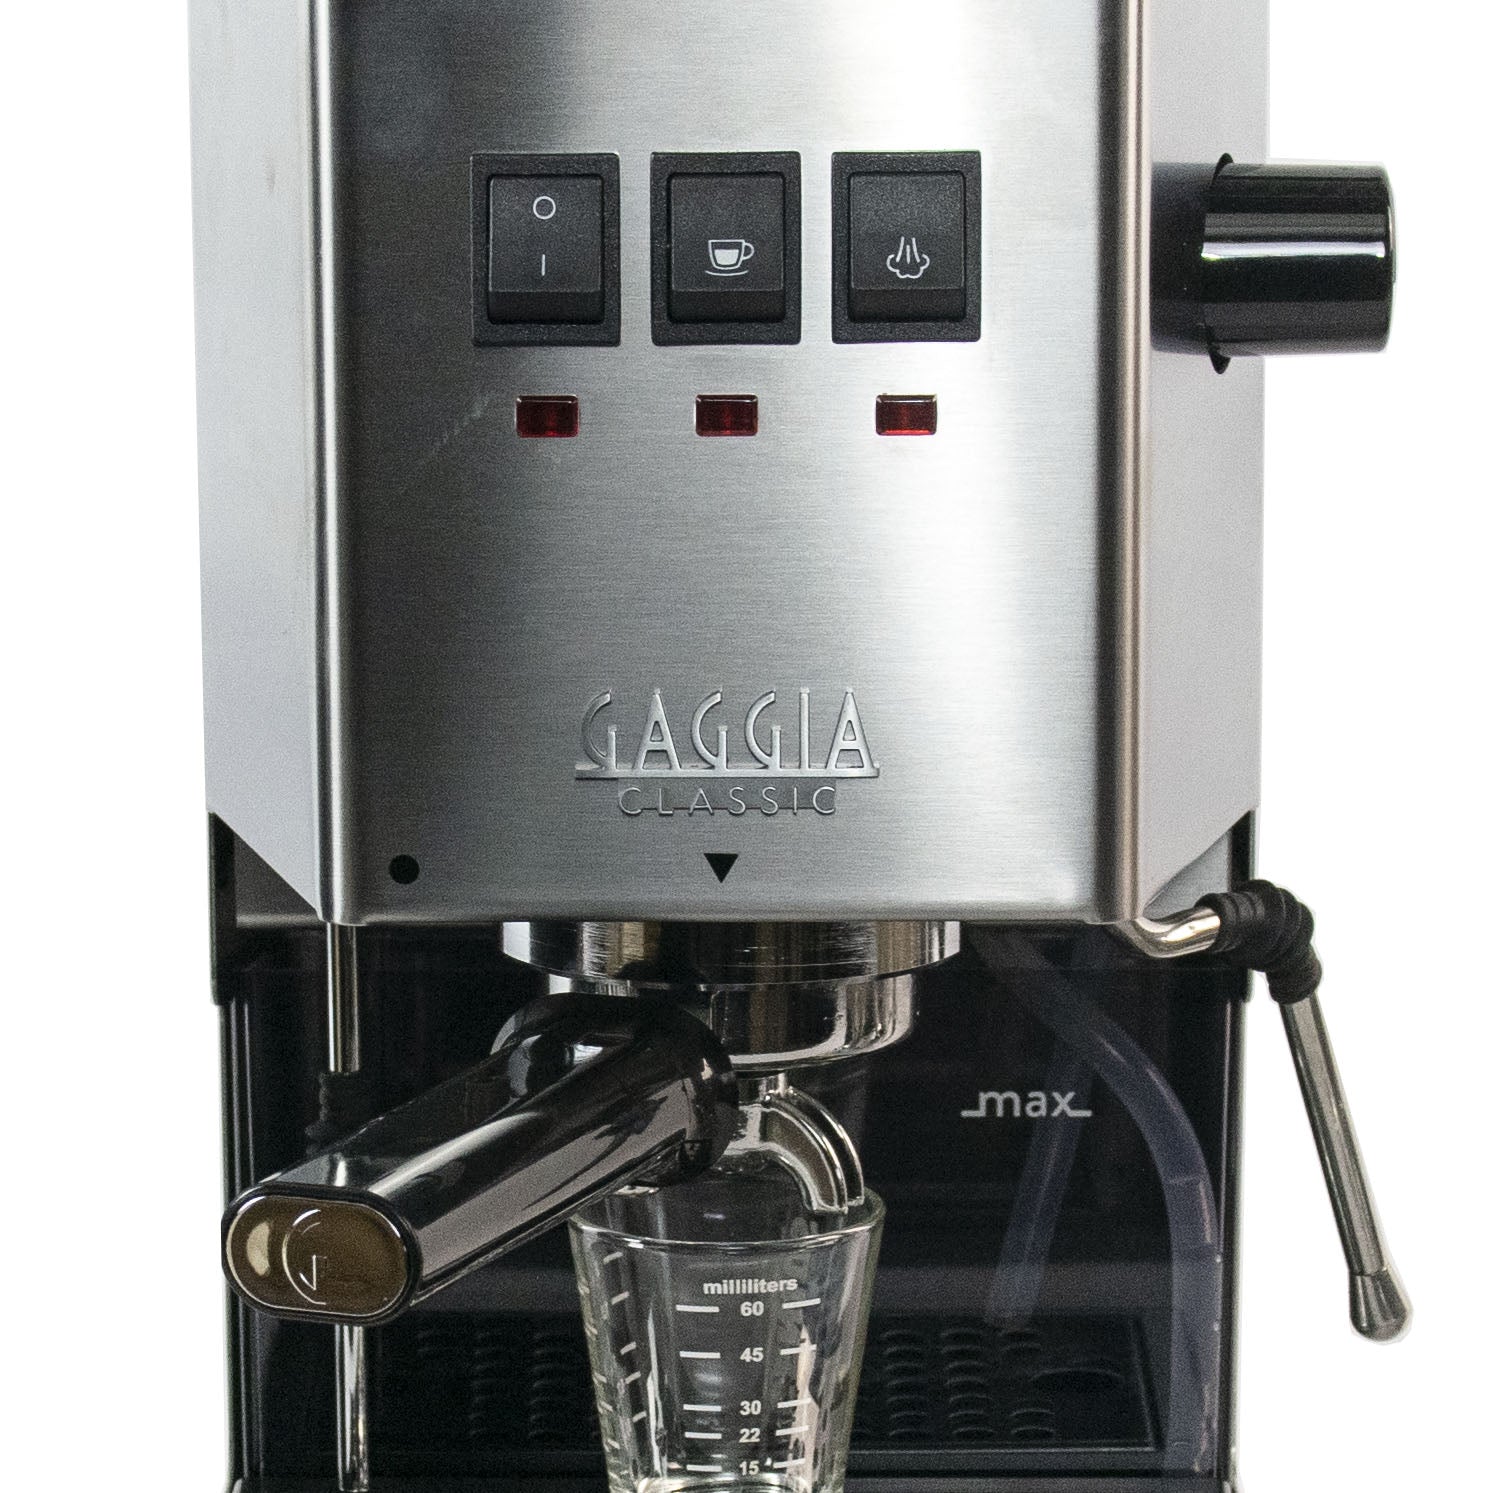 Gaggia Classic PRO - Stainless Steel